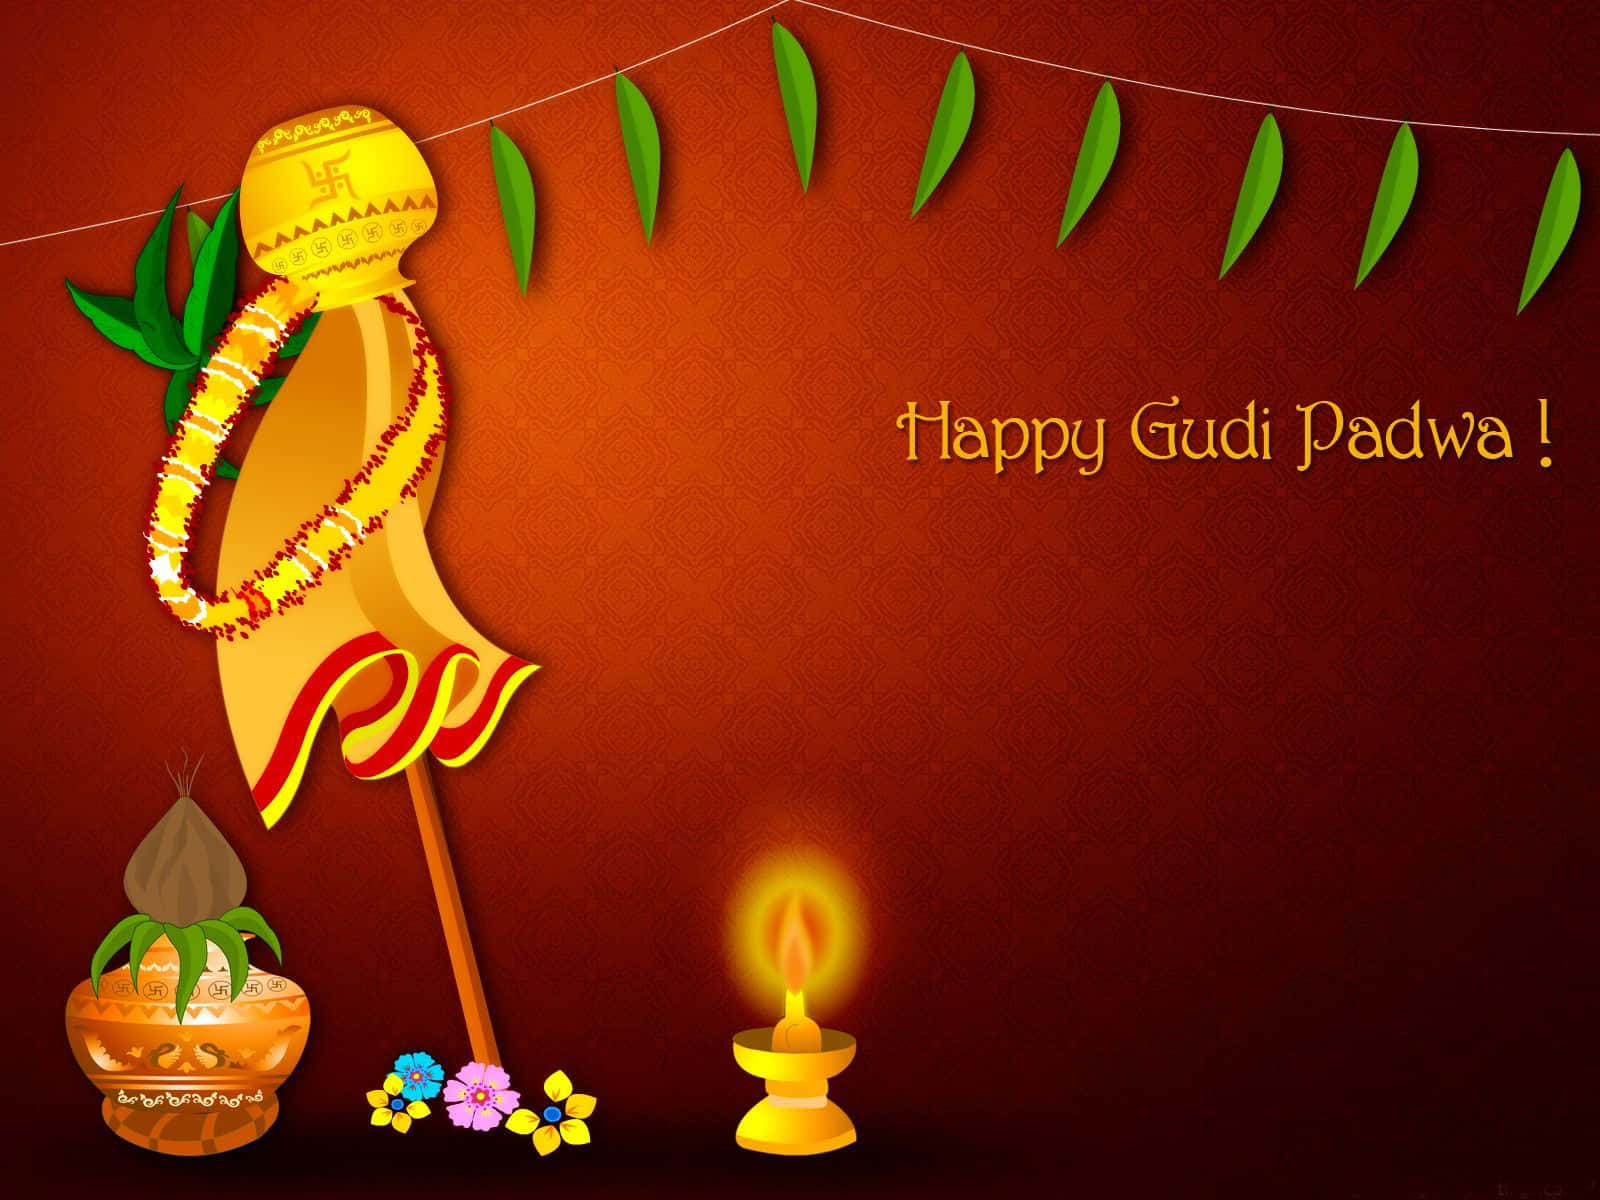 Celebrate the Beginning of a New Year With Gudi Padwa!